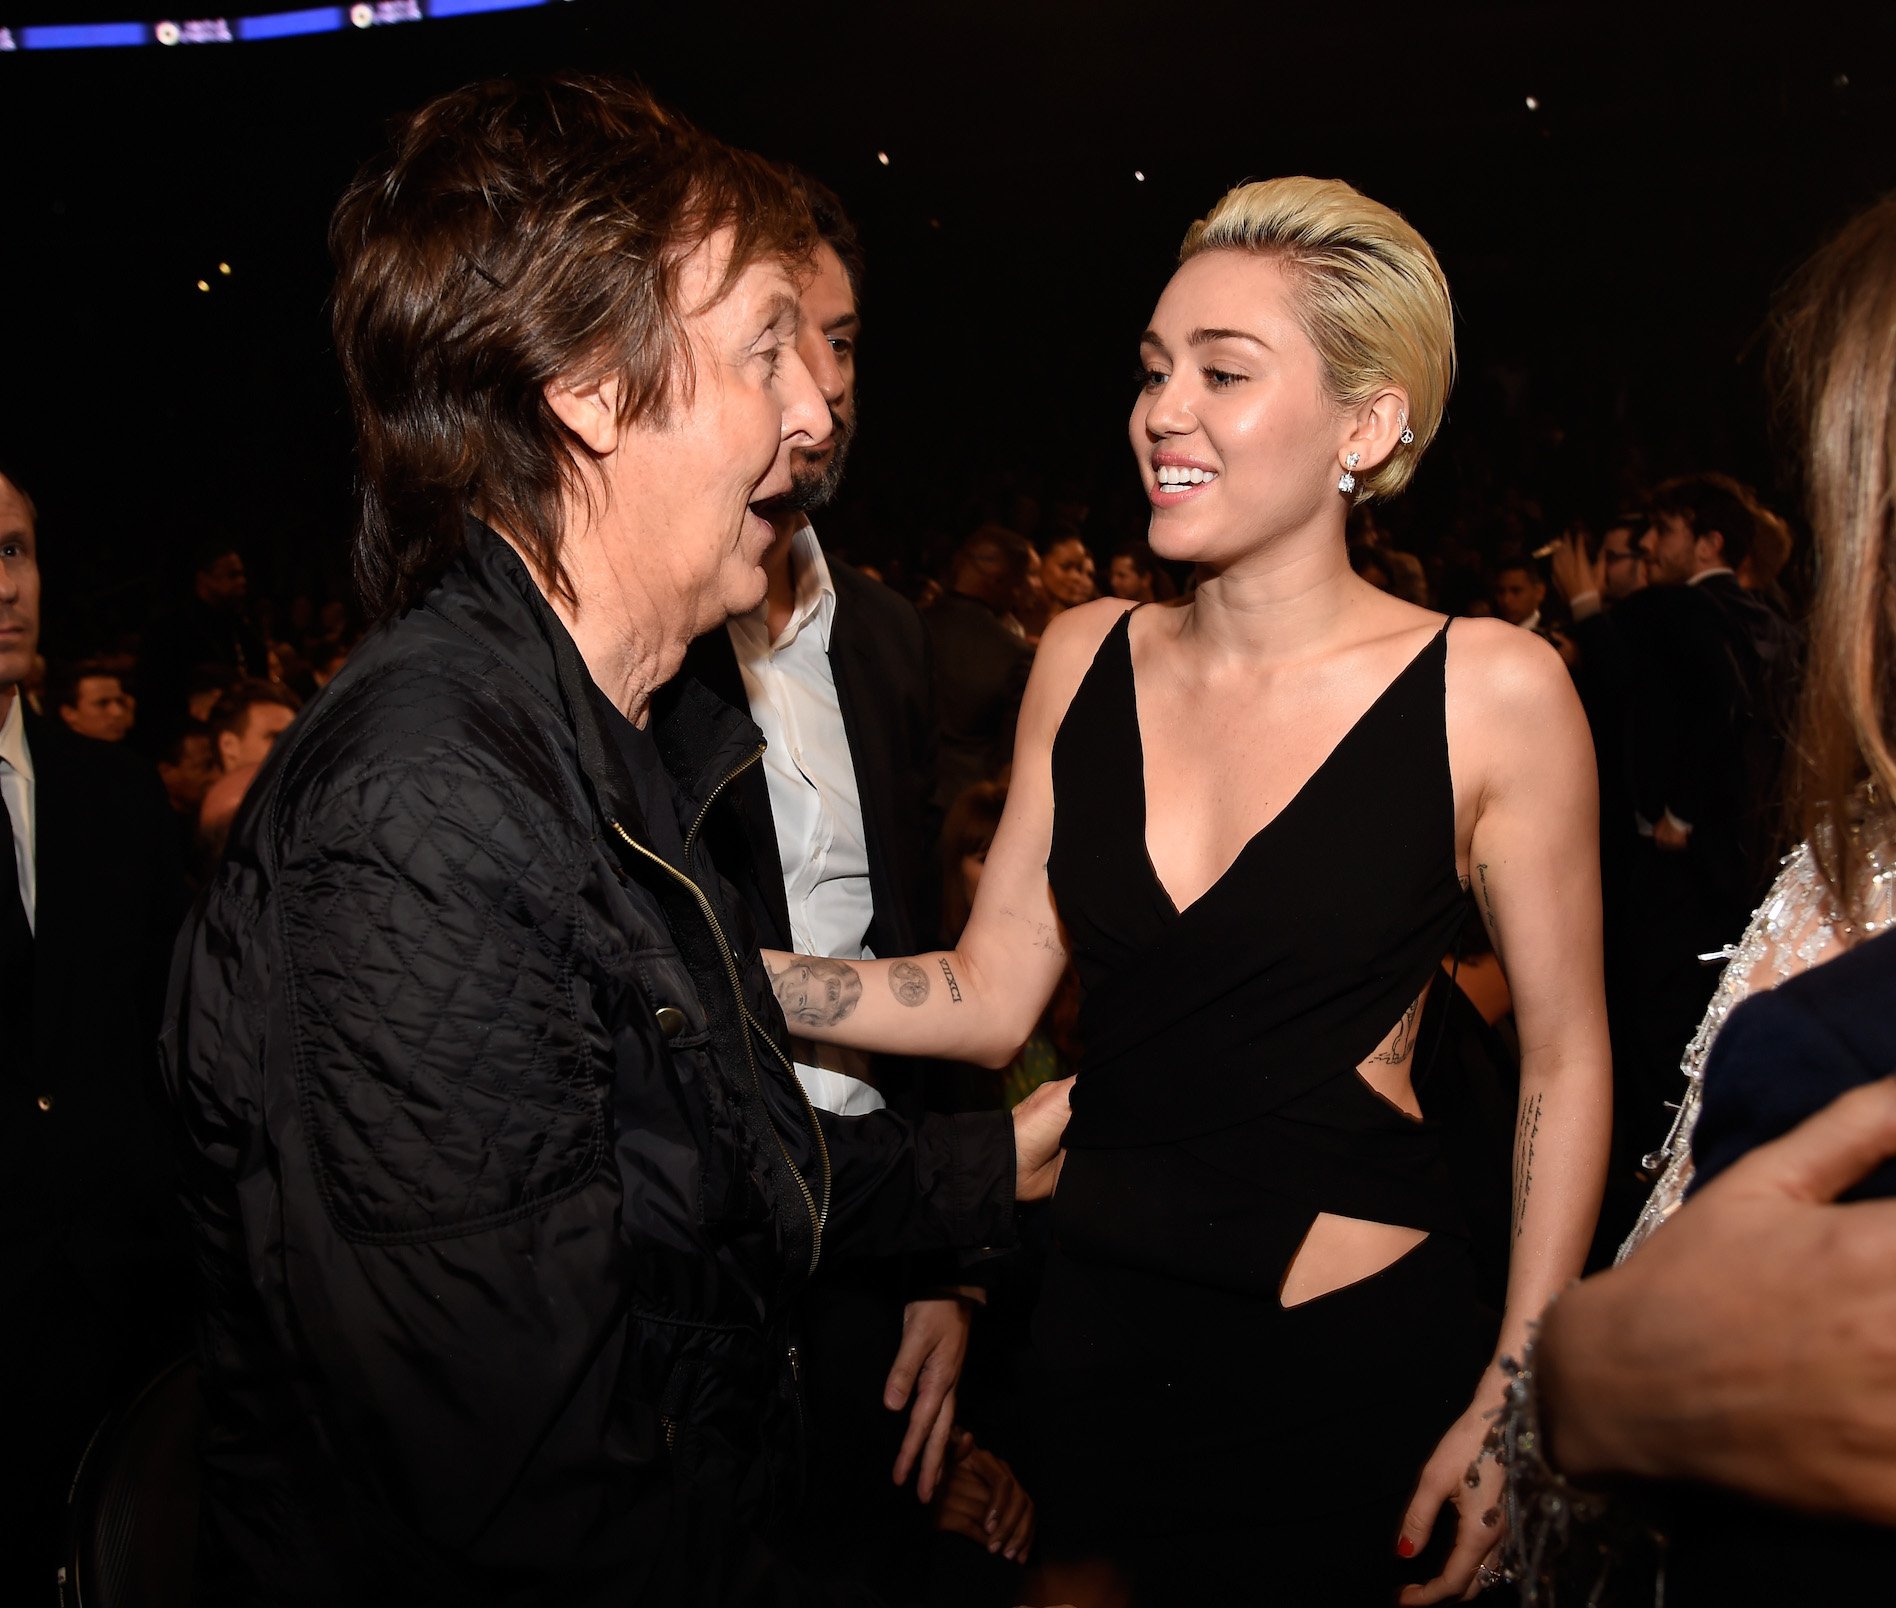 Paul McCartney and Miley Cyrus attend the 57th Annual Grammy Awards at the Staples Center in Los Angeles, California